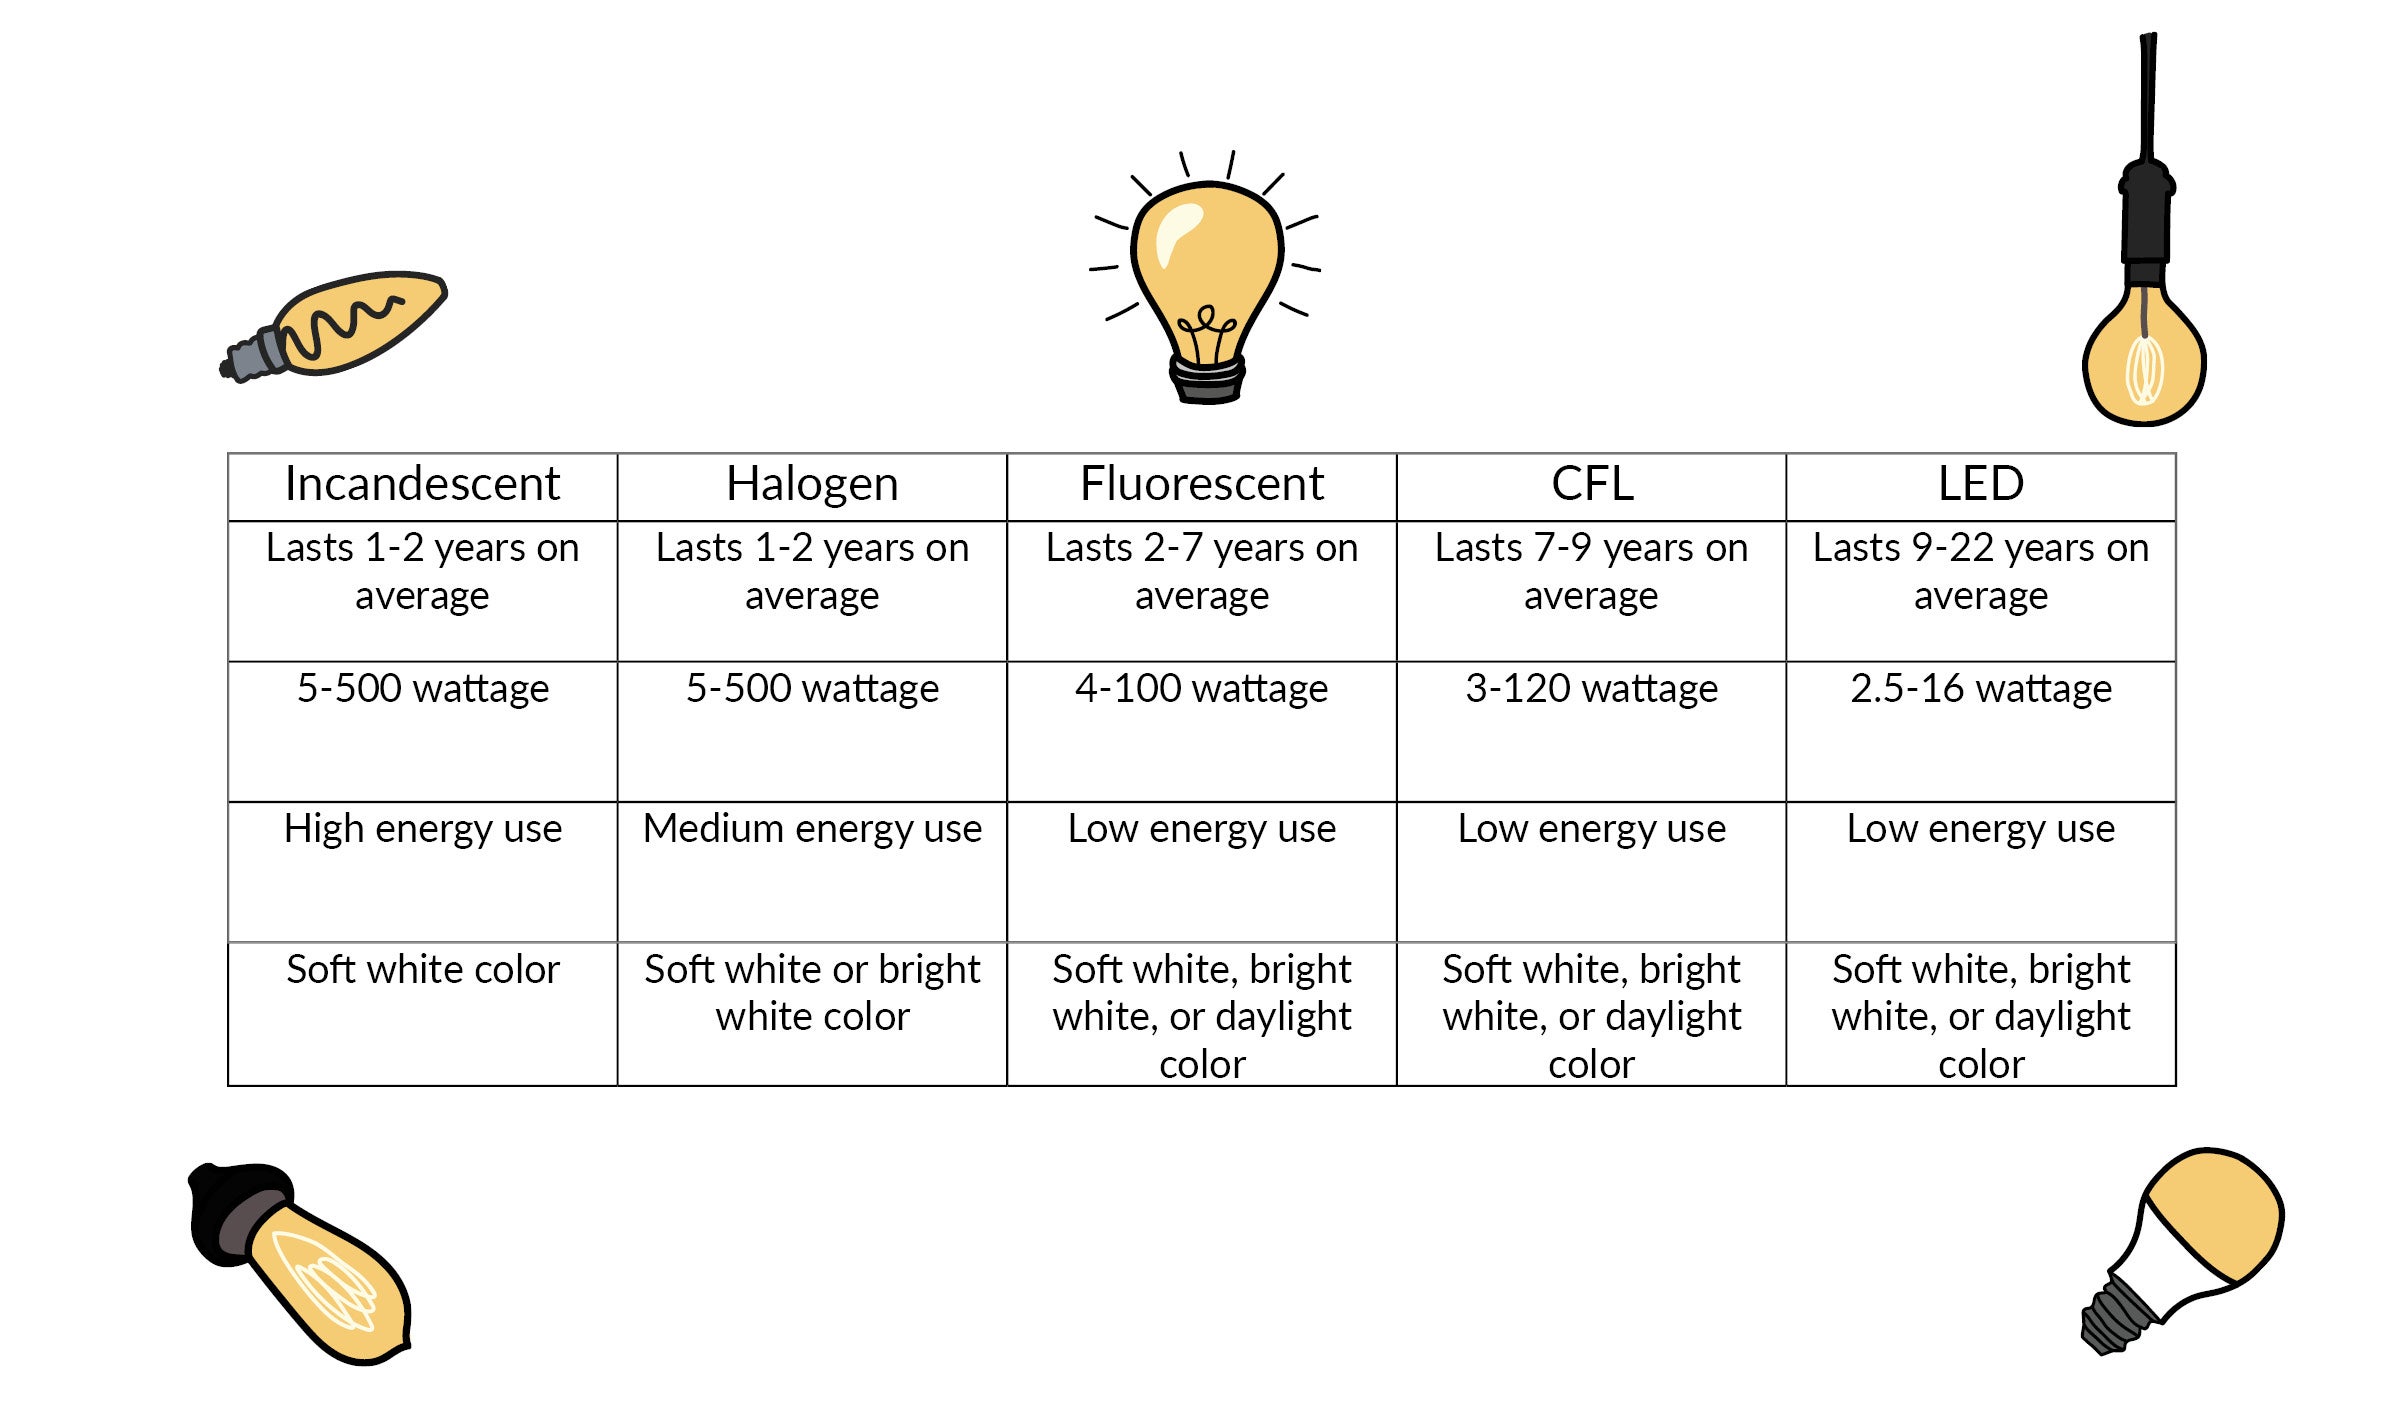 Table describing differences between kinds of light bulbs